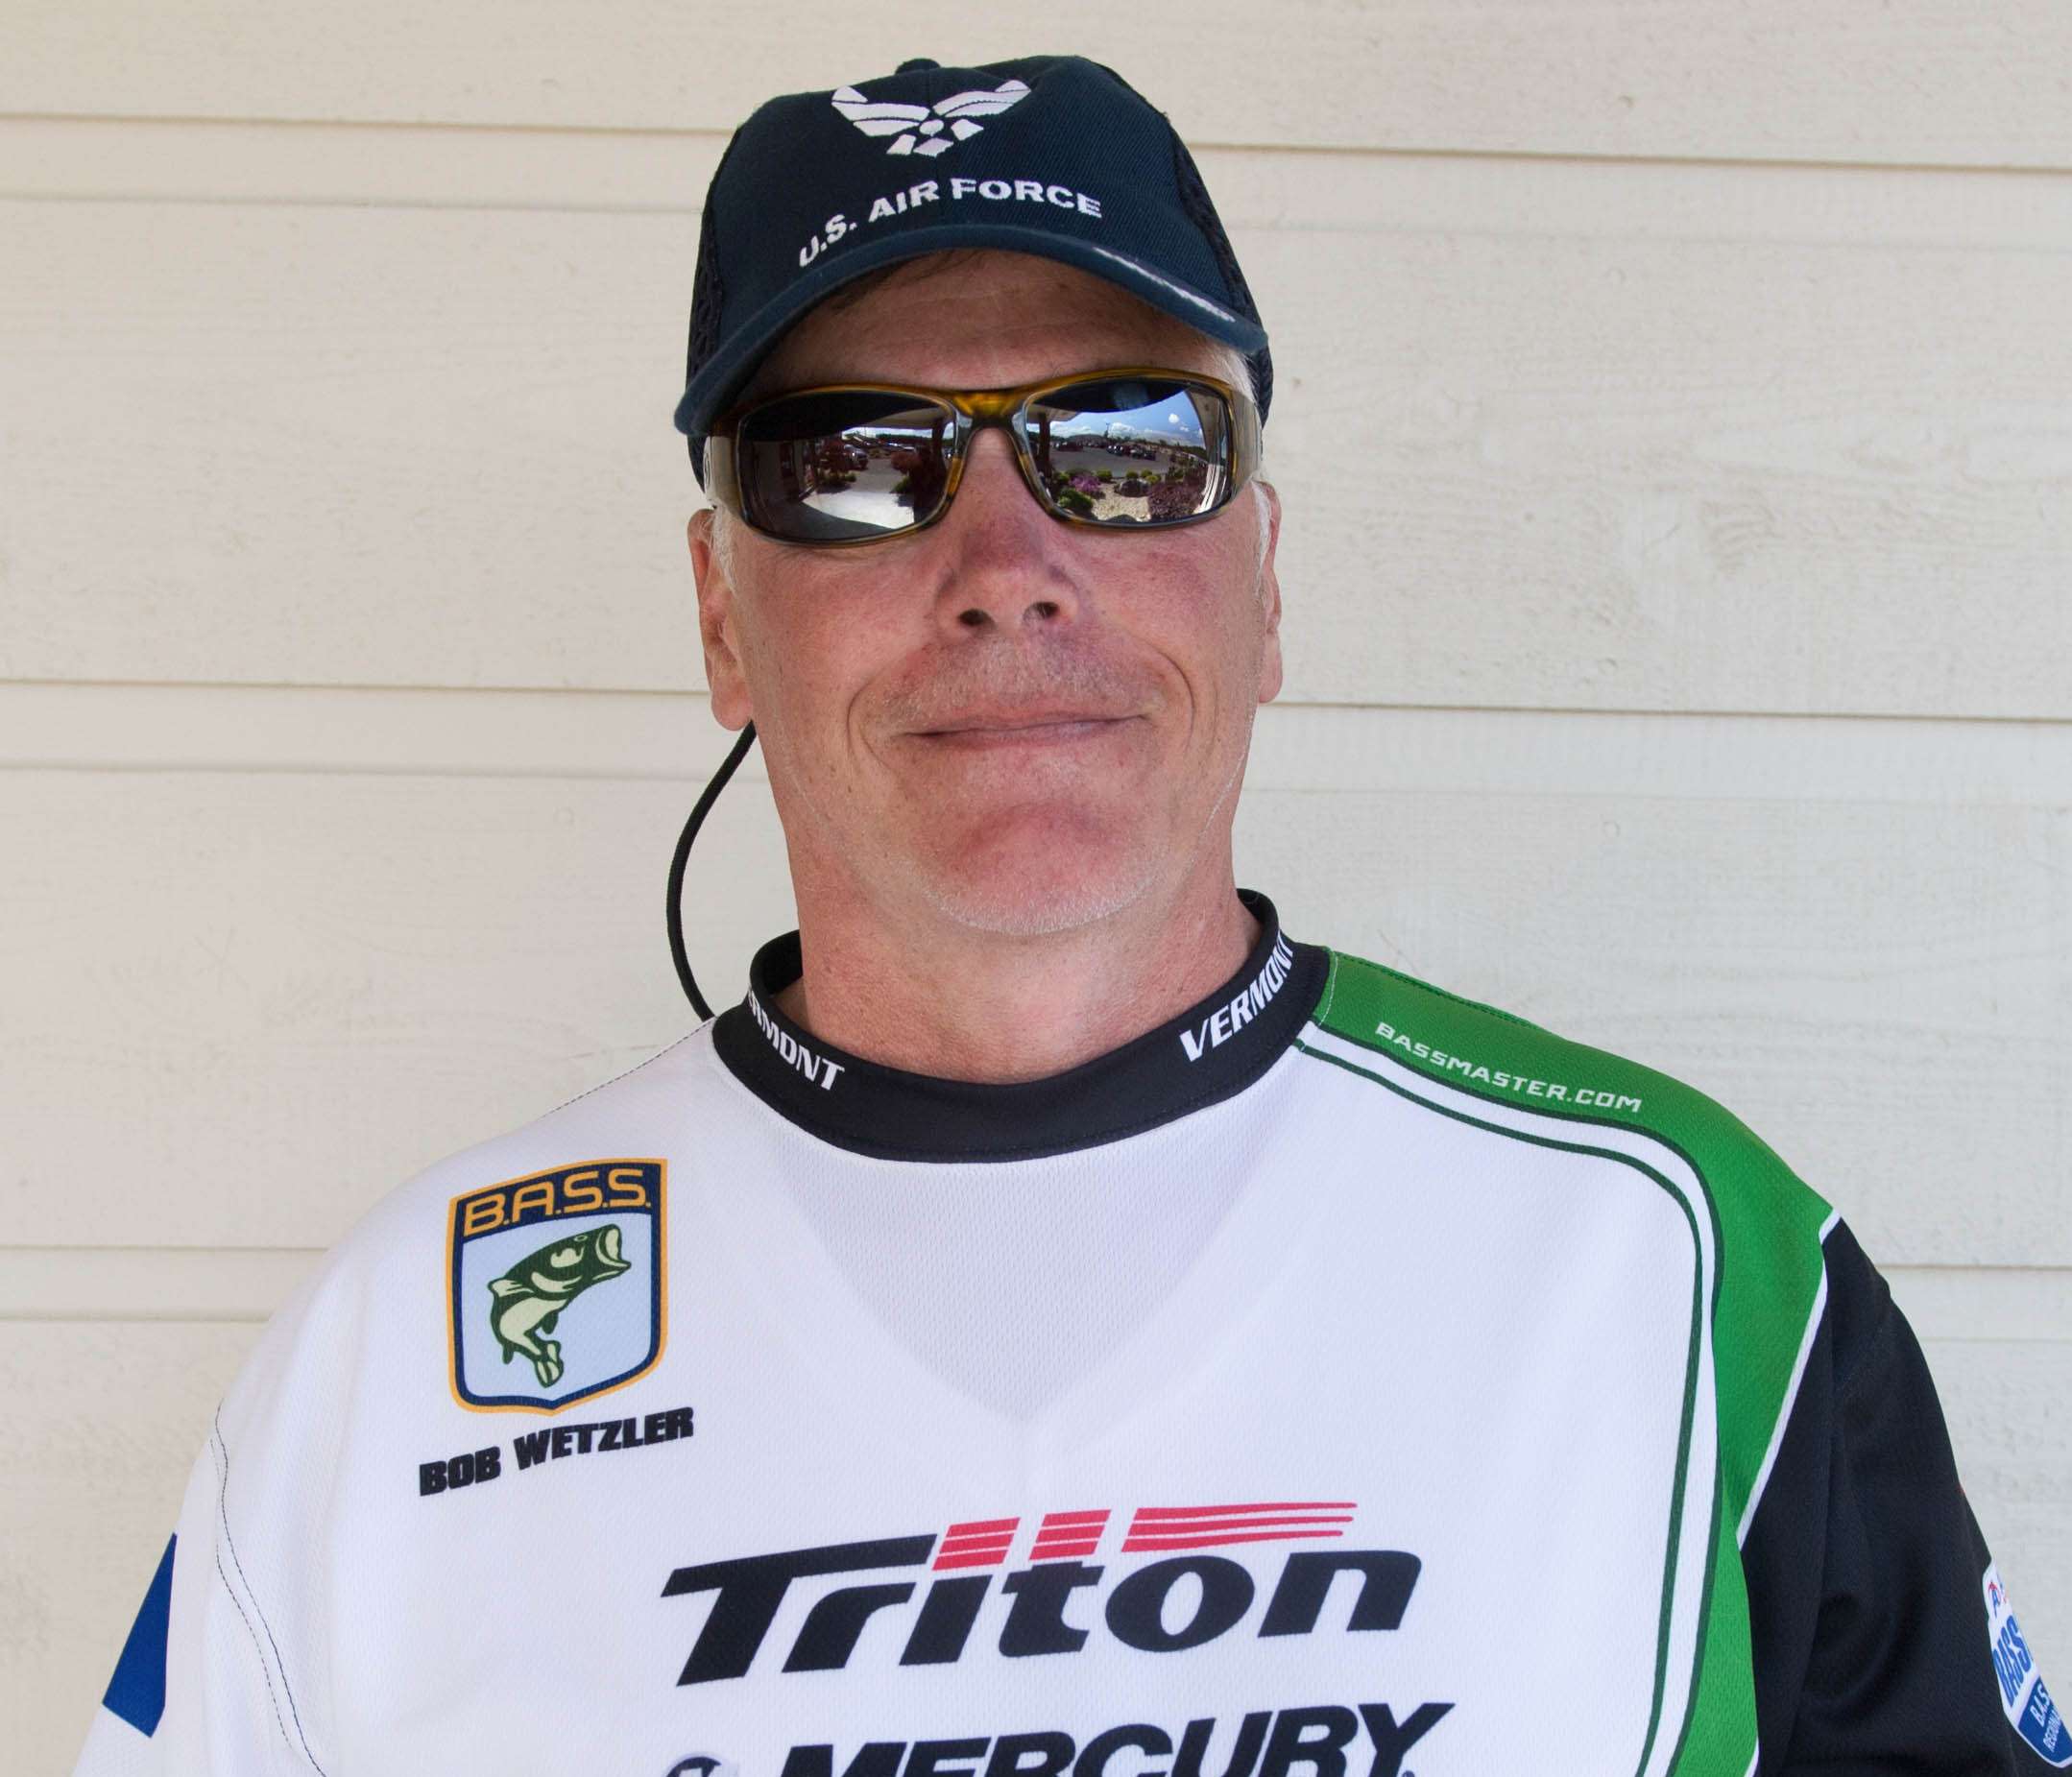 Bob Wetzler <br>
Vermont Nonboater <br>
Bob Wetzler is retired from the Air Force. Now, he delves into travel and history, when heâs not fishing with the Rutland B.A.S.S. Club. This championship will be Wetzlerâs first. 